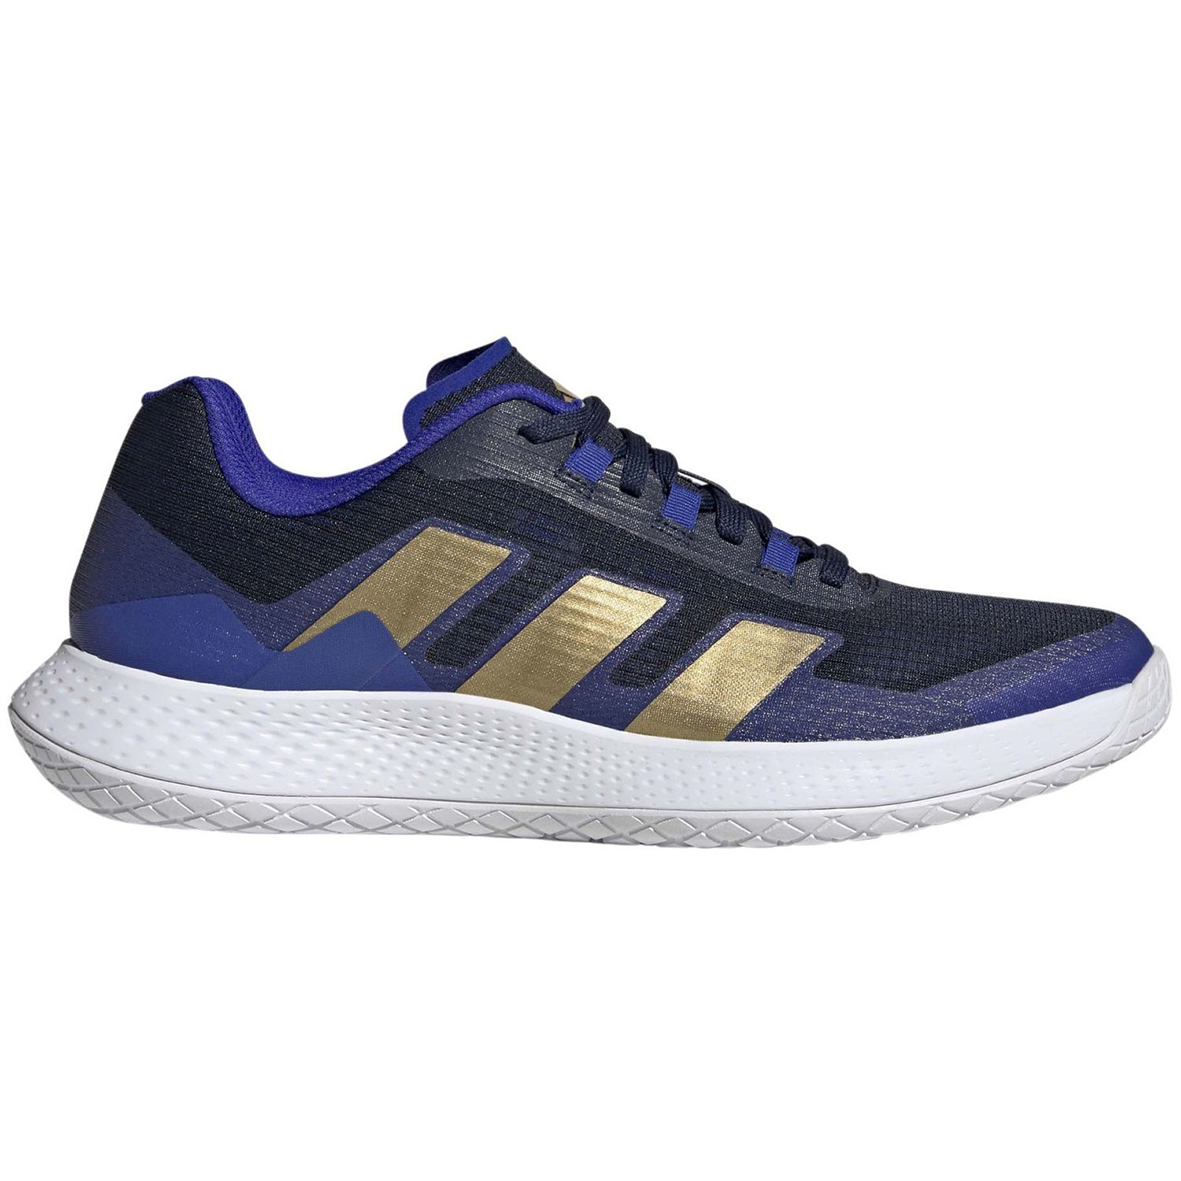 ADIDAS FORCEBOUNCE 2.0 M SHOES.